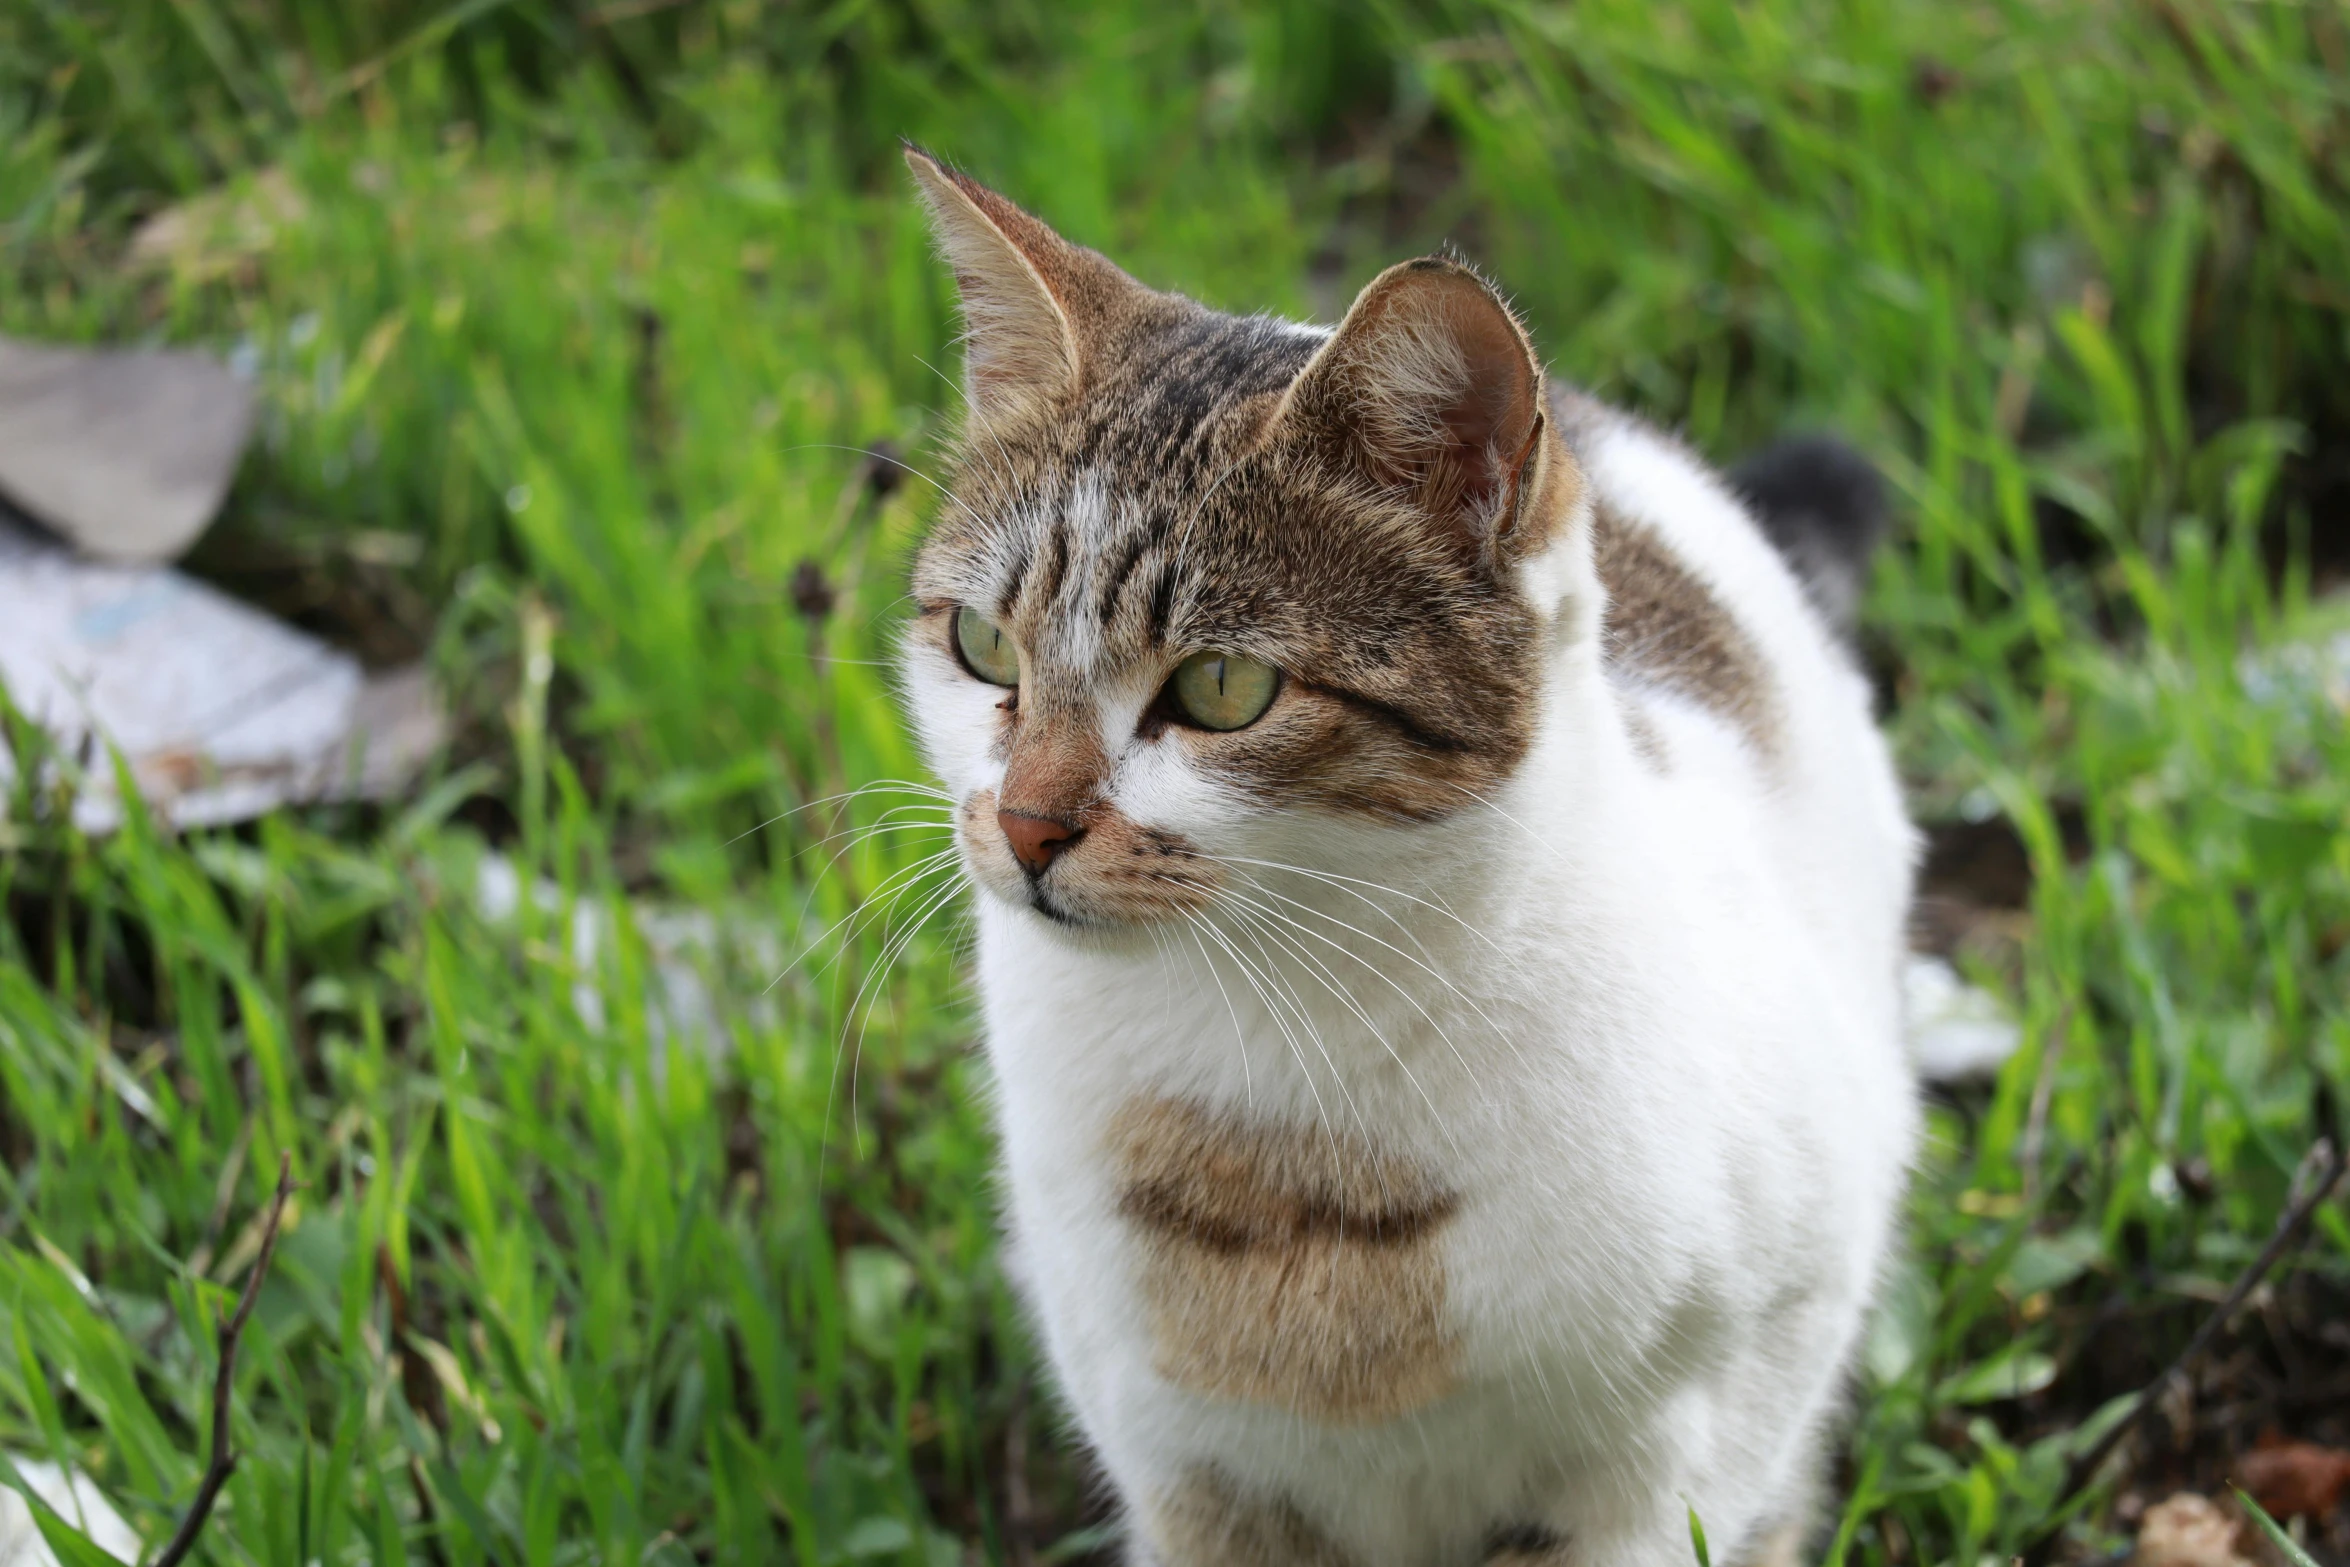 a cat standing in some green grass and looking up